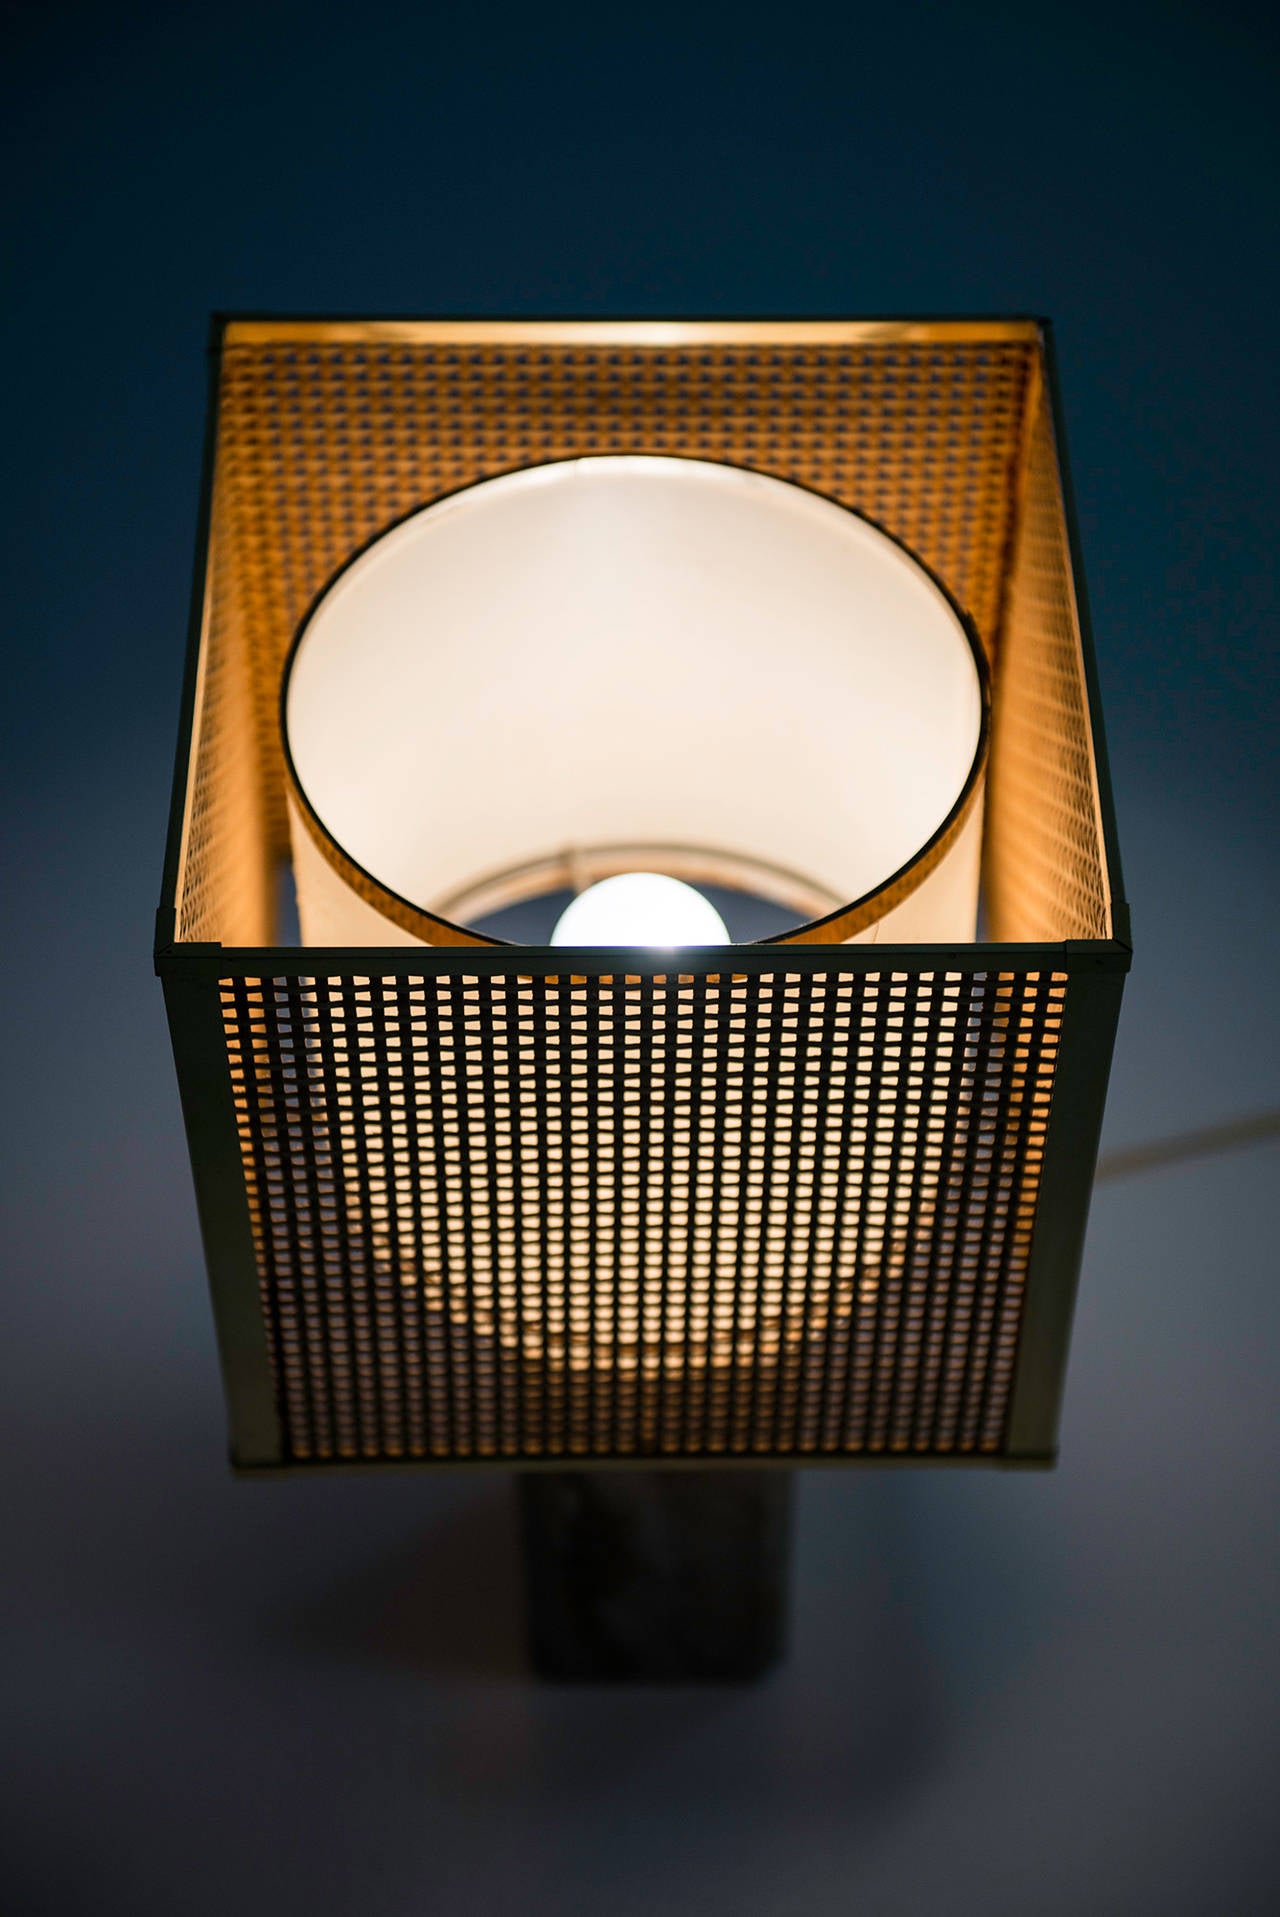 Mid-20th Century Fili Mannelli Table Lamp in Travertine, Woven Cane and Brass